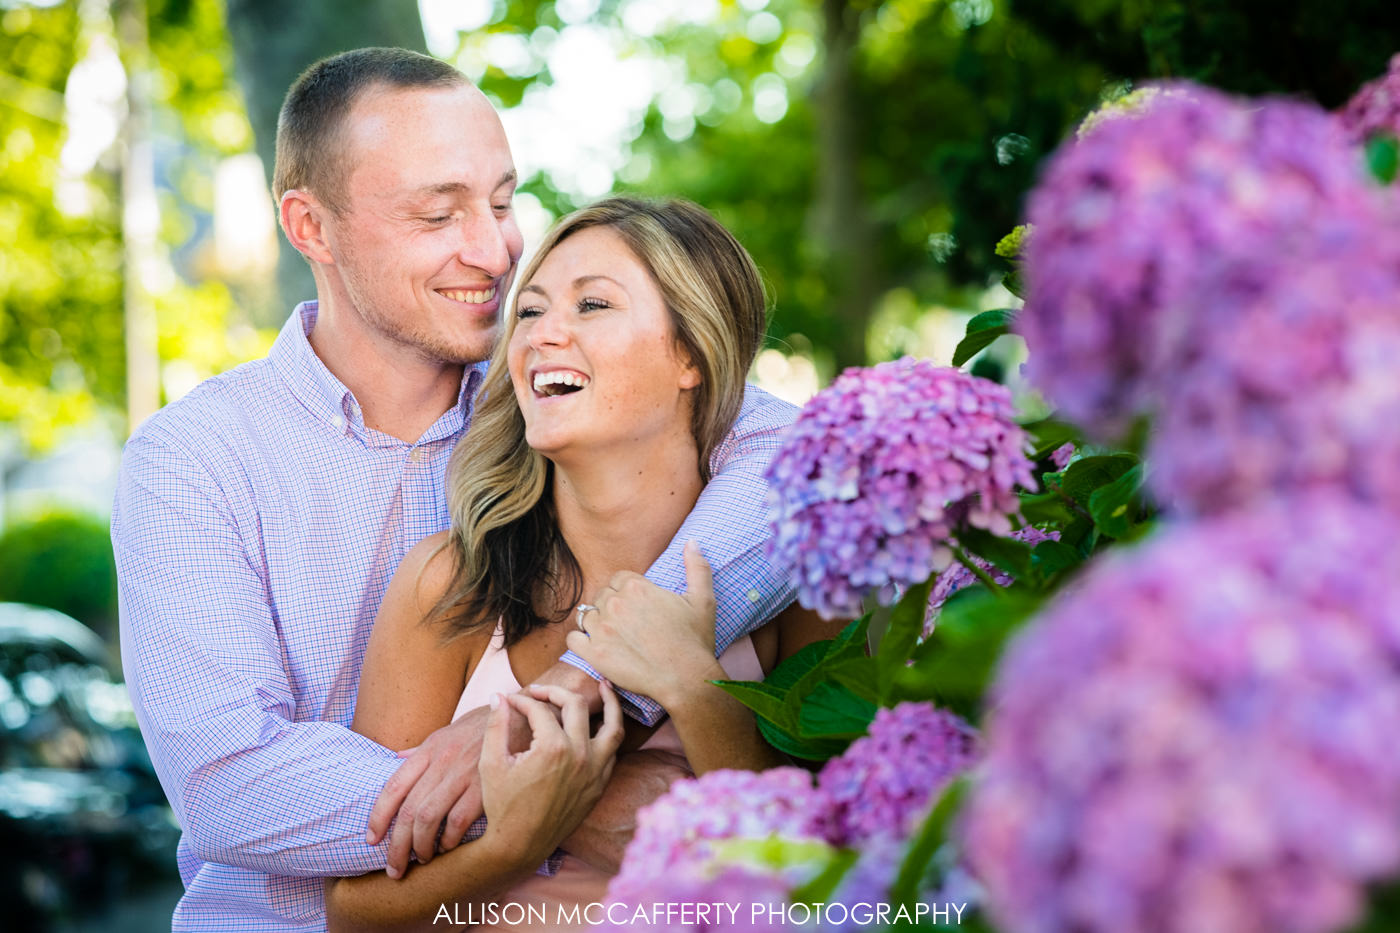 Cape May Engagement Session Locations